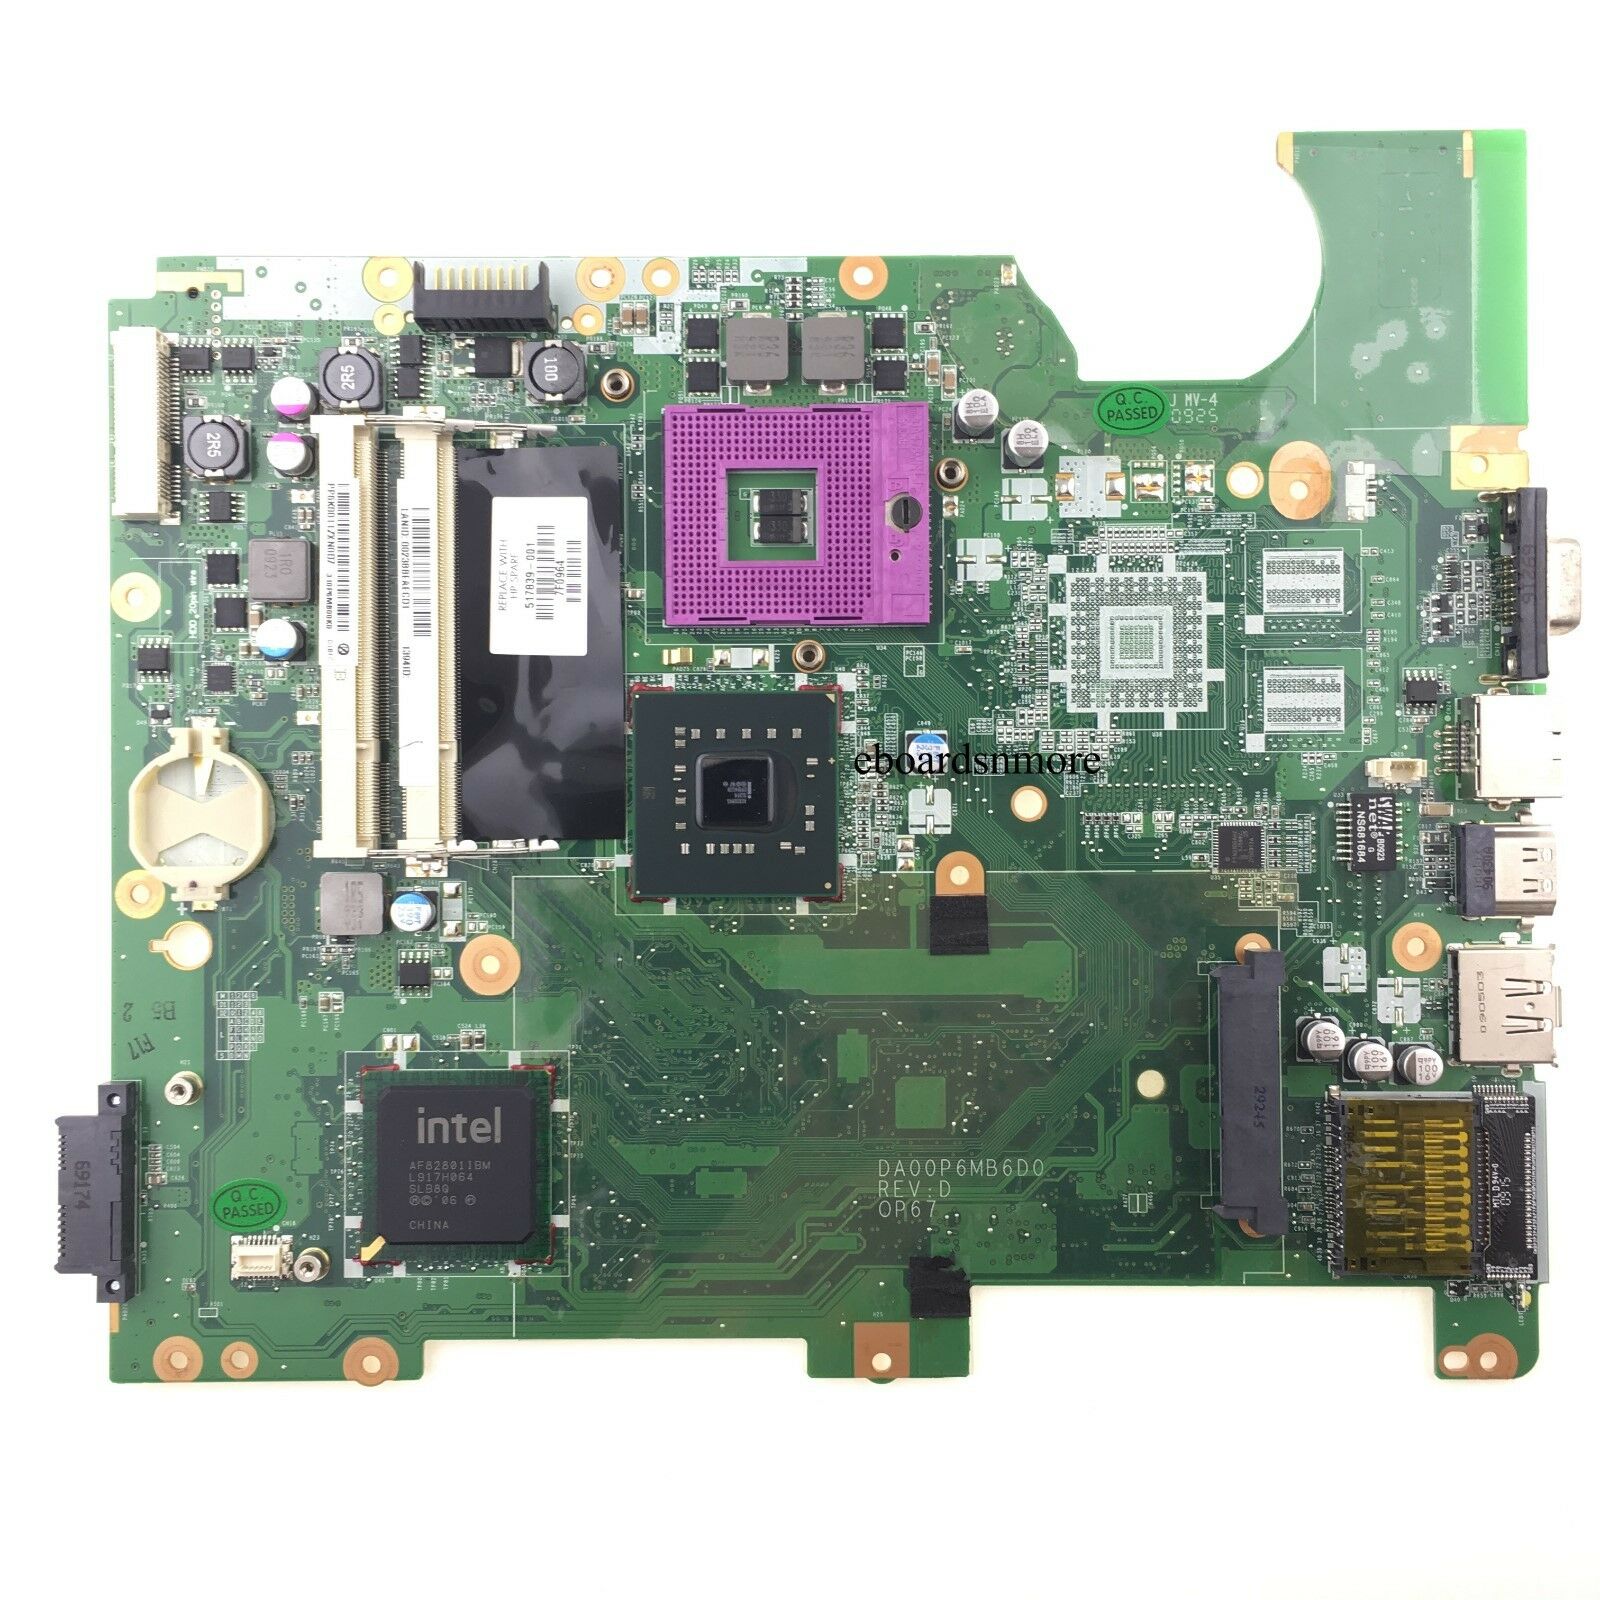 517839-001 for HP Compaq CQ61 G61 Laptop Intel Motherboard,GM45 chipset,Grade A Compatible CPU Brand: Intel